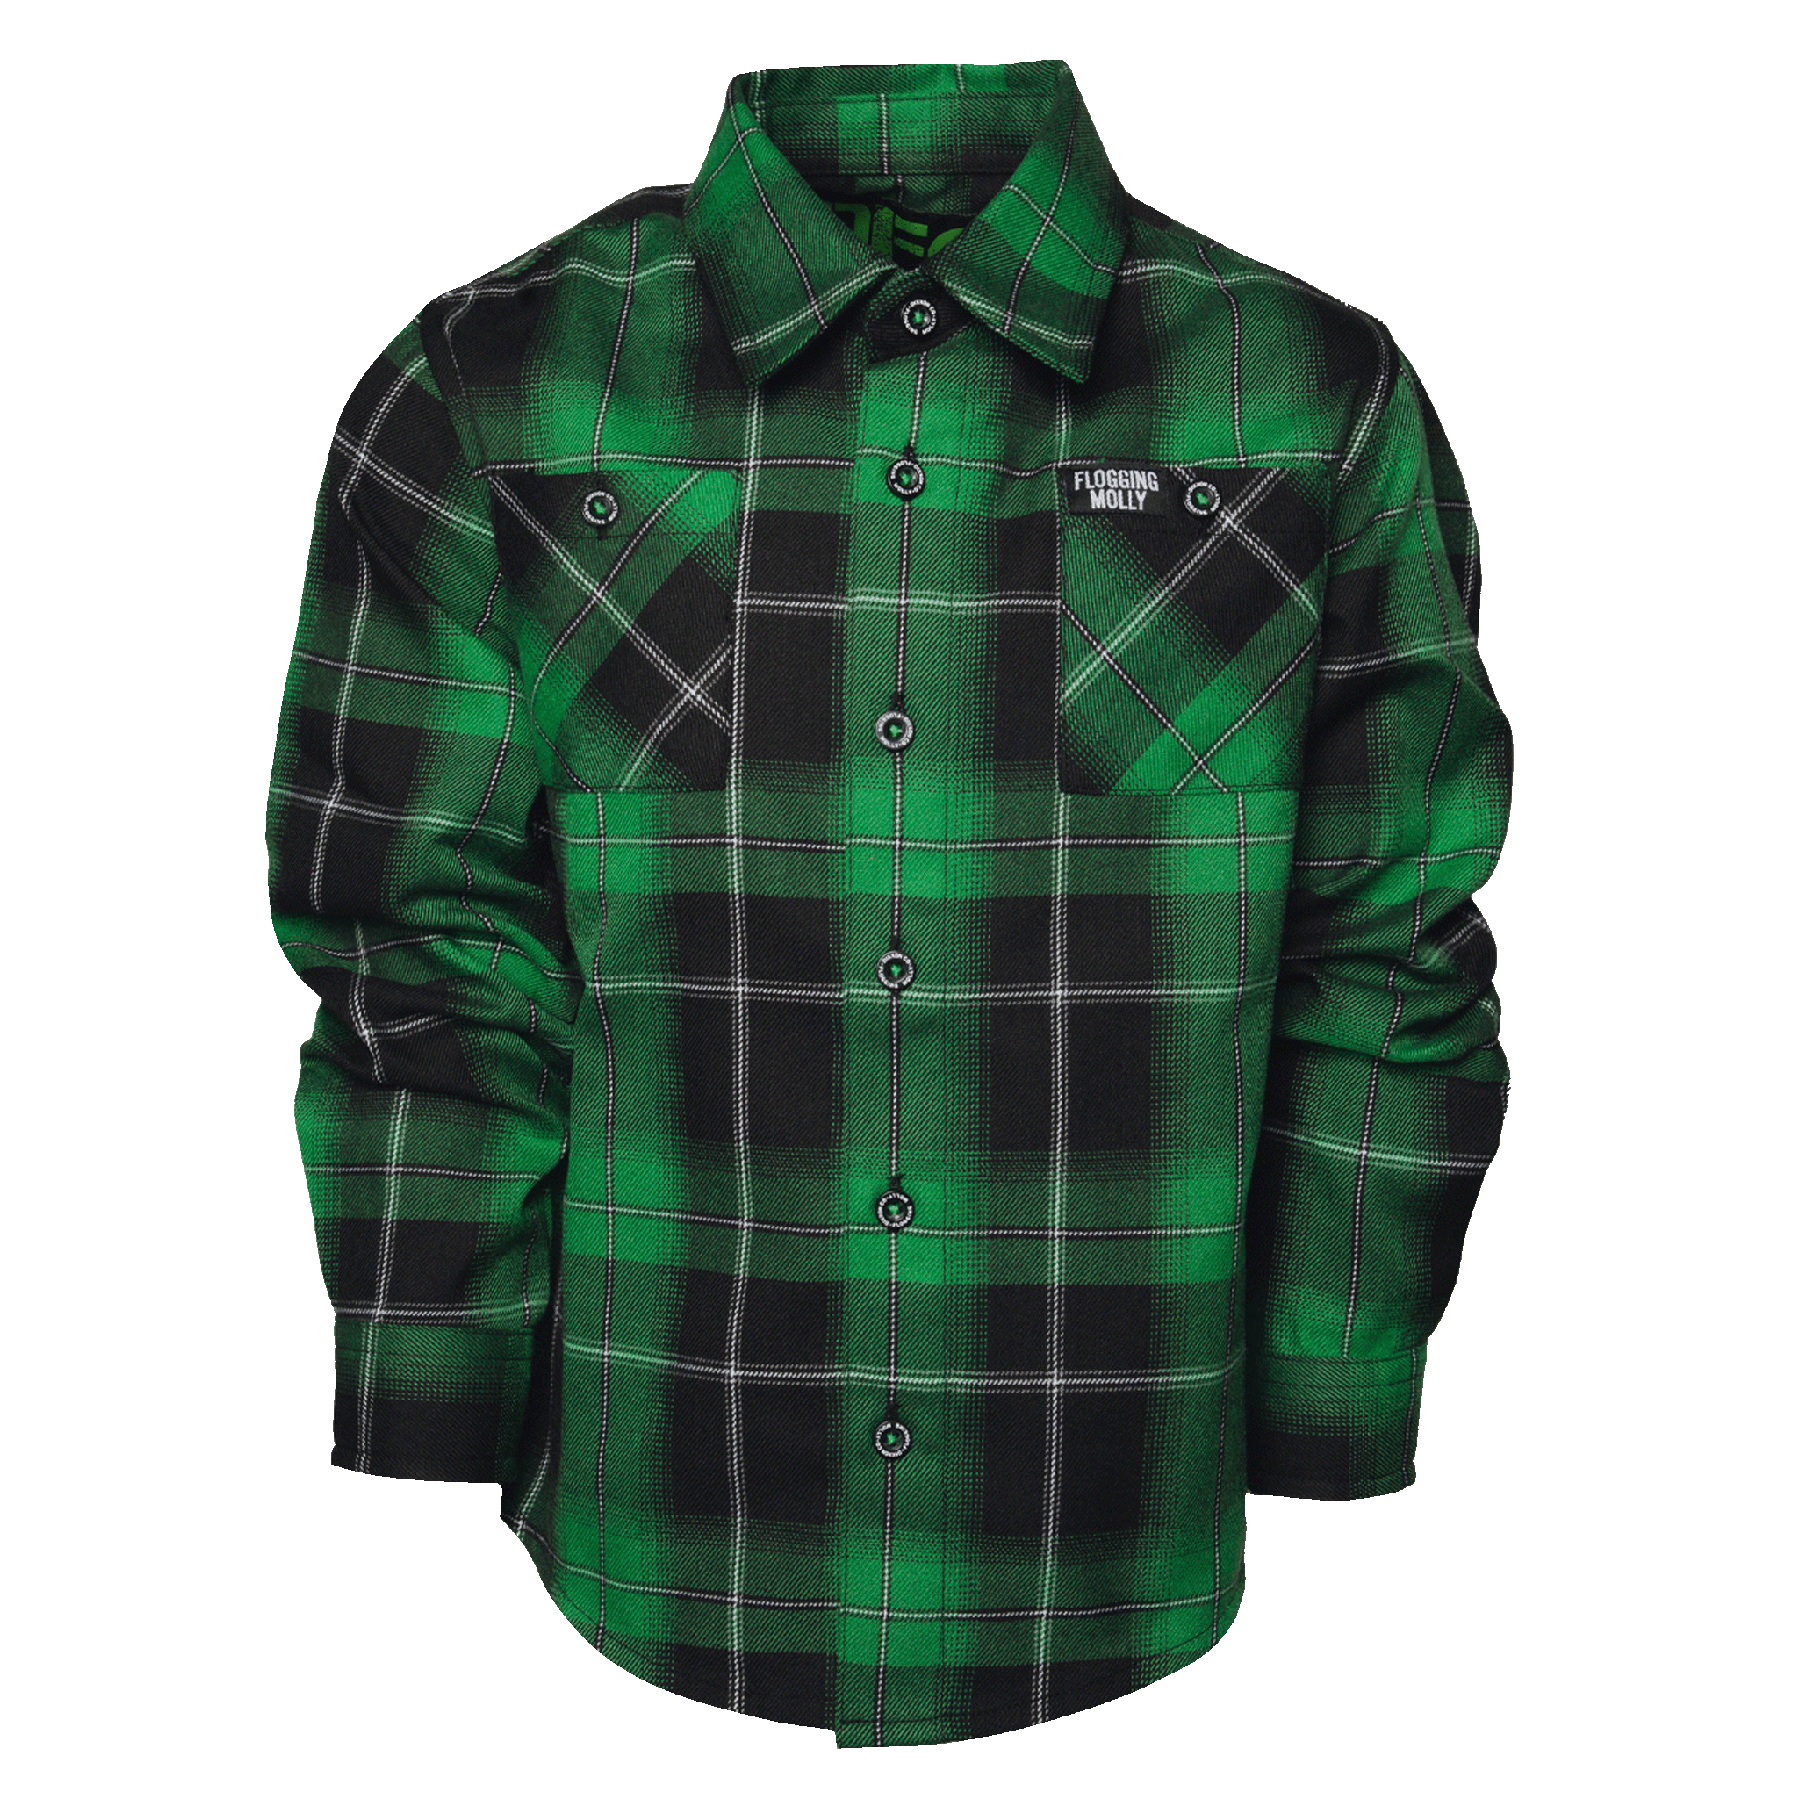 Youth Flogging Molly Flannel - Dixxon Flannel Co.